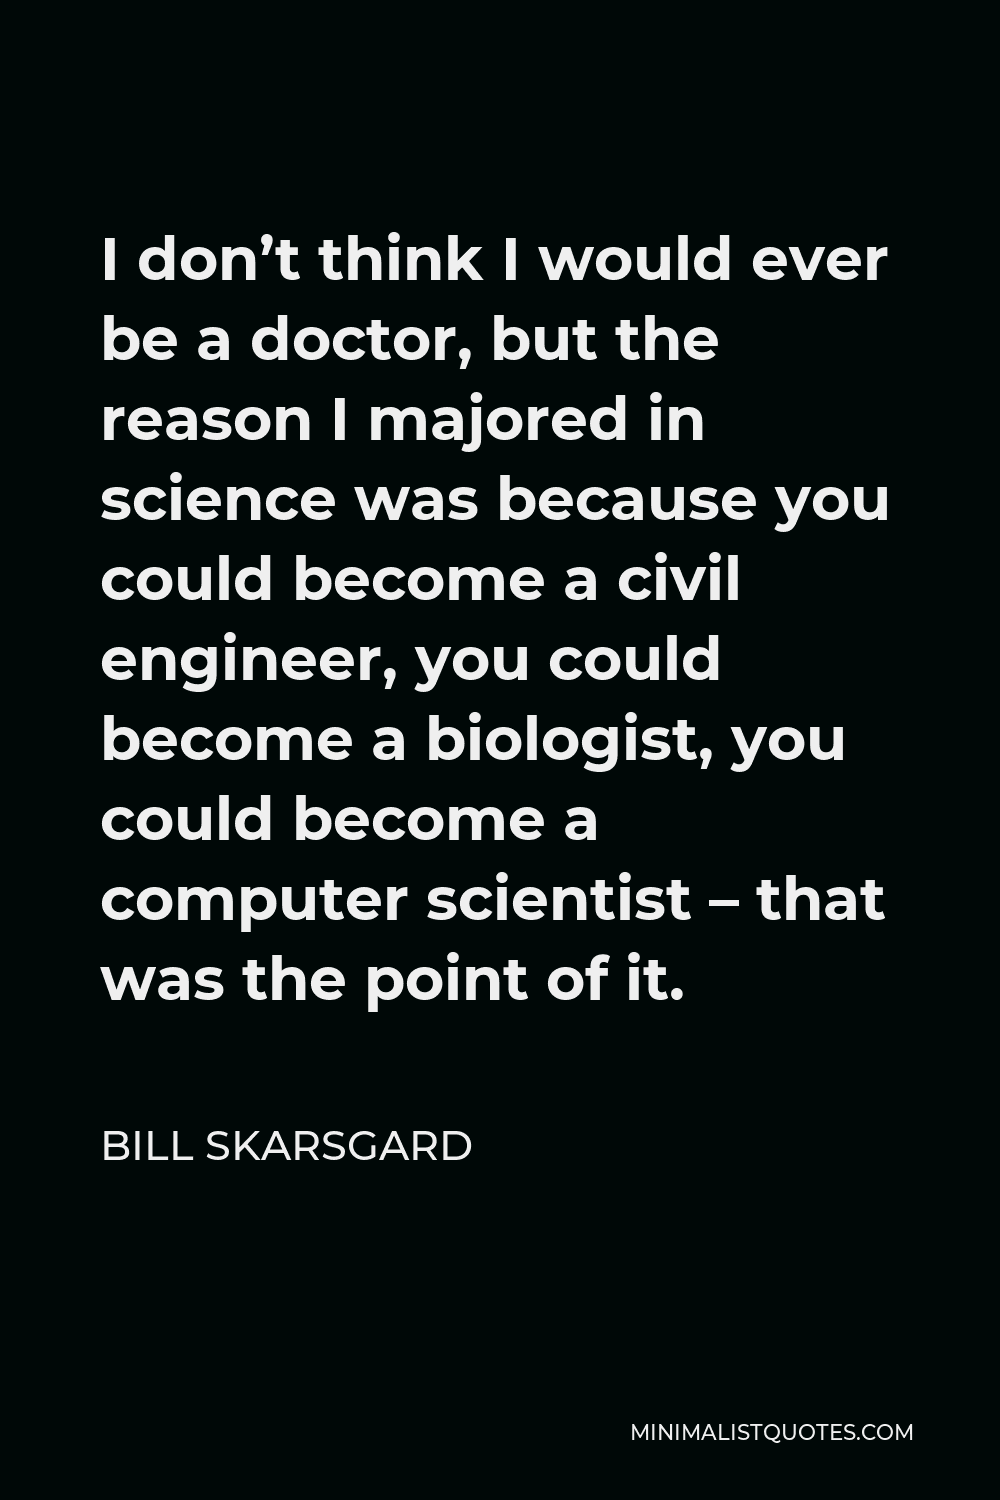 Bill Skarsgard Quote - I don’t think I would ever be a doctor, but the reason I majored in science was because you could become a civil engineer, you could become a biologist, you could become a computer scientist – that was the point of it.